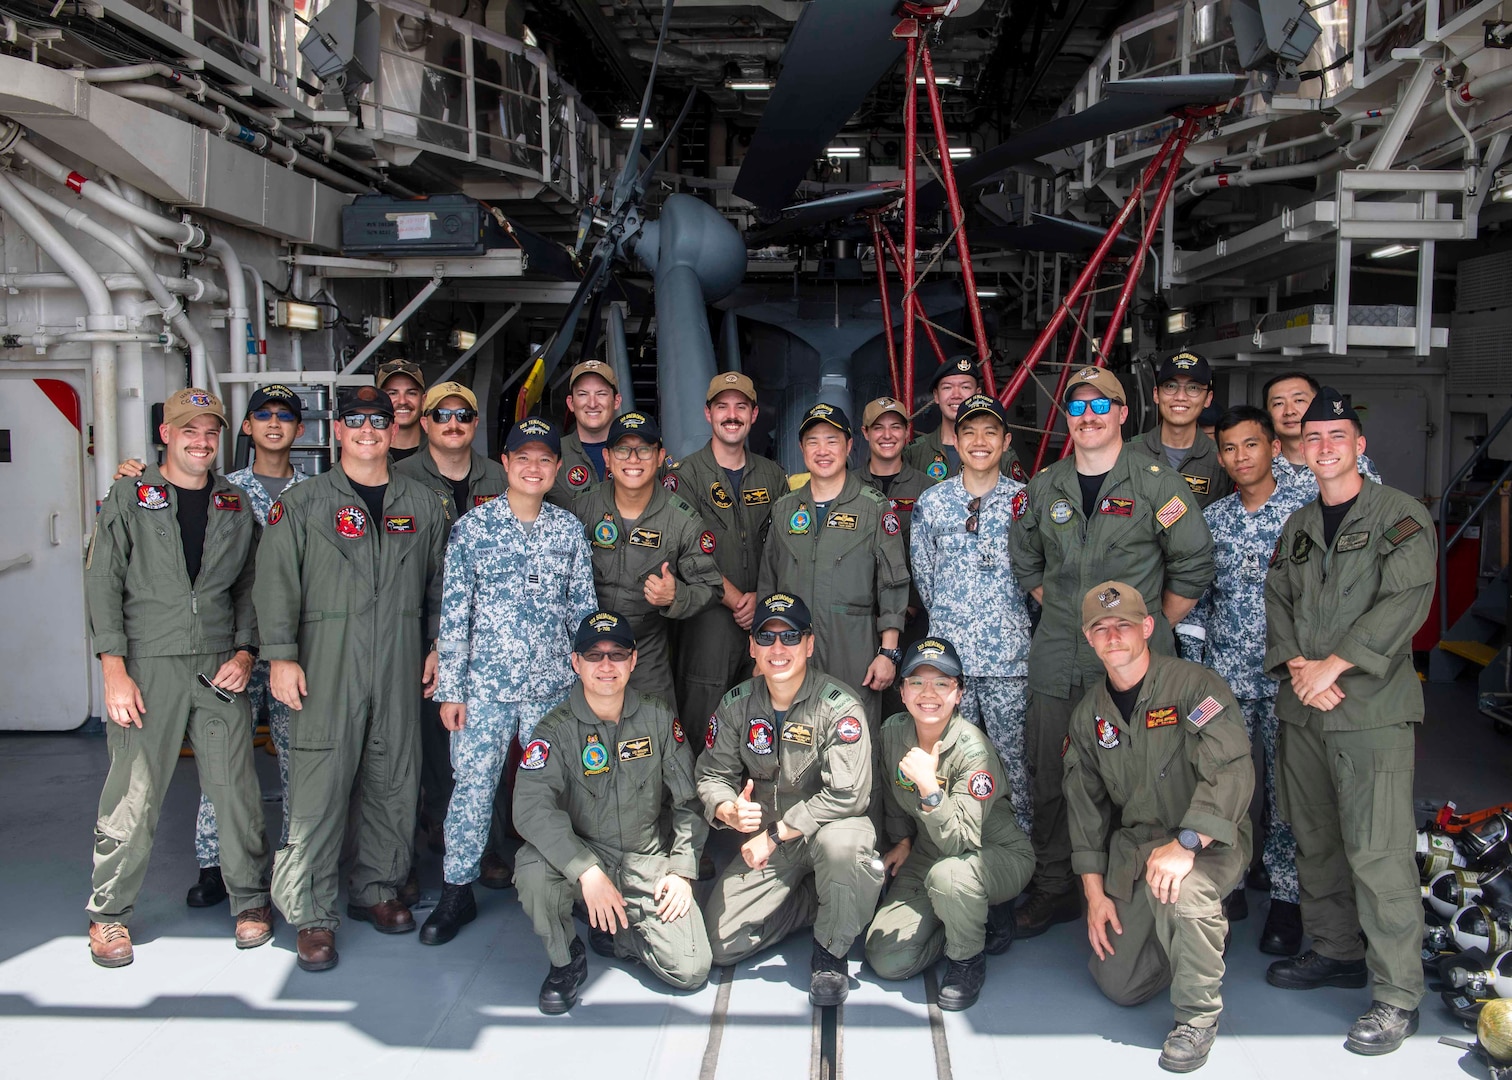 SANTA RITA, Guam, (June 19, 2023) – U.S. and Singaporean Sailors pose for photo in the hangar bay of Independence-variant littoral combat ship USS Manchester (LCS 14), during Exercise Pacific Griffin 2023. Pacific Griffin 2023 is a biennial maritime exercise between the U.S. and Republic of Singapore. Conducted in the waters near Guam, the two navies enhance combined maritime proficiency while strengthening relationships during two weeks of dynamic training evolutions ashore and at sea. Littoral Combat Ships are fast, optimally manned, mission-tailored surface combatants that operate in near-shore and open-ocean environments, winning against 21st-century coastal threats. Manchester, part of Destroyer Squadron 7, is on a rotational deployment operating in the U.S. 7TH Fleet area of operations to enhance interoperability with Allies and partners and serve as a ready-response force in support of a free and open Indo-Pacific region. (U.S. Navy photo by Mass Communication Specialist 2nd Class Christopher Thomas)